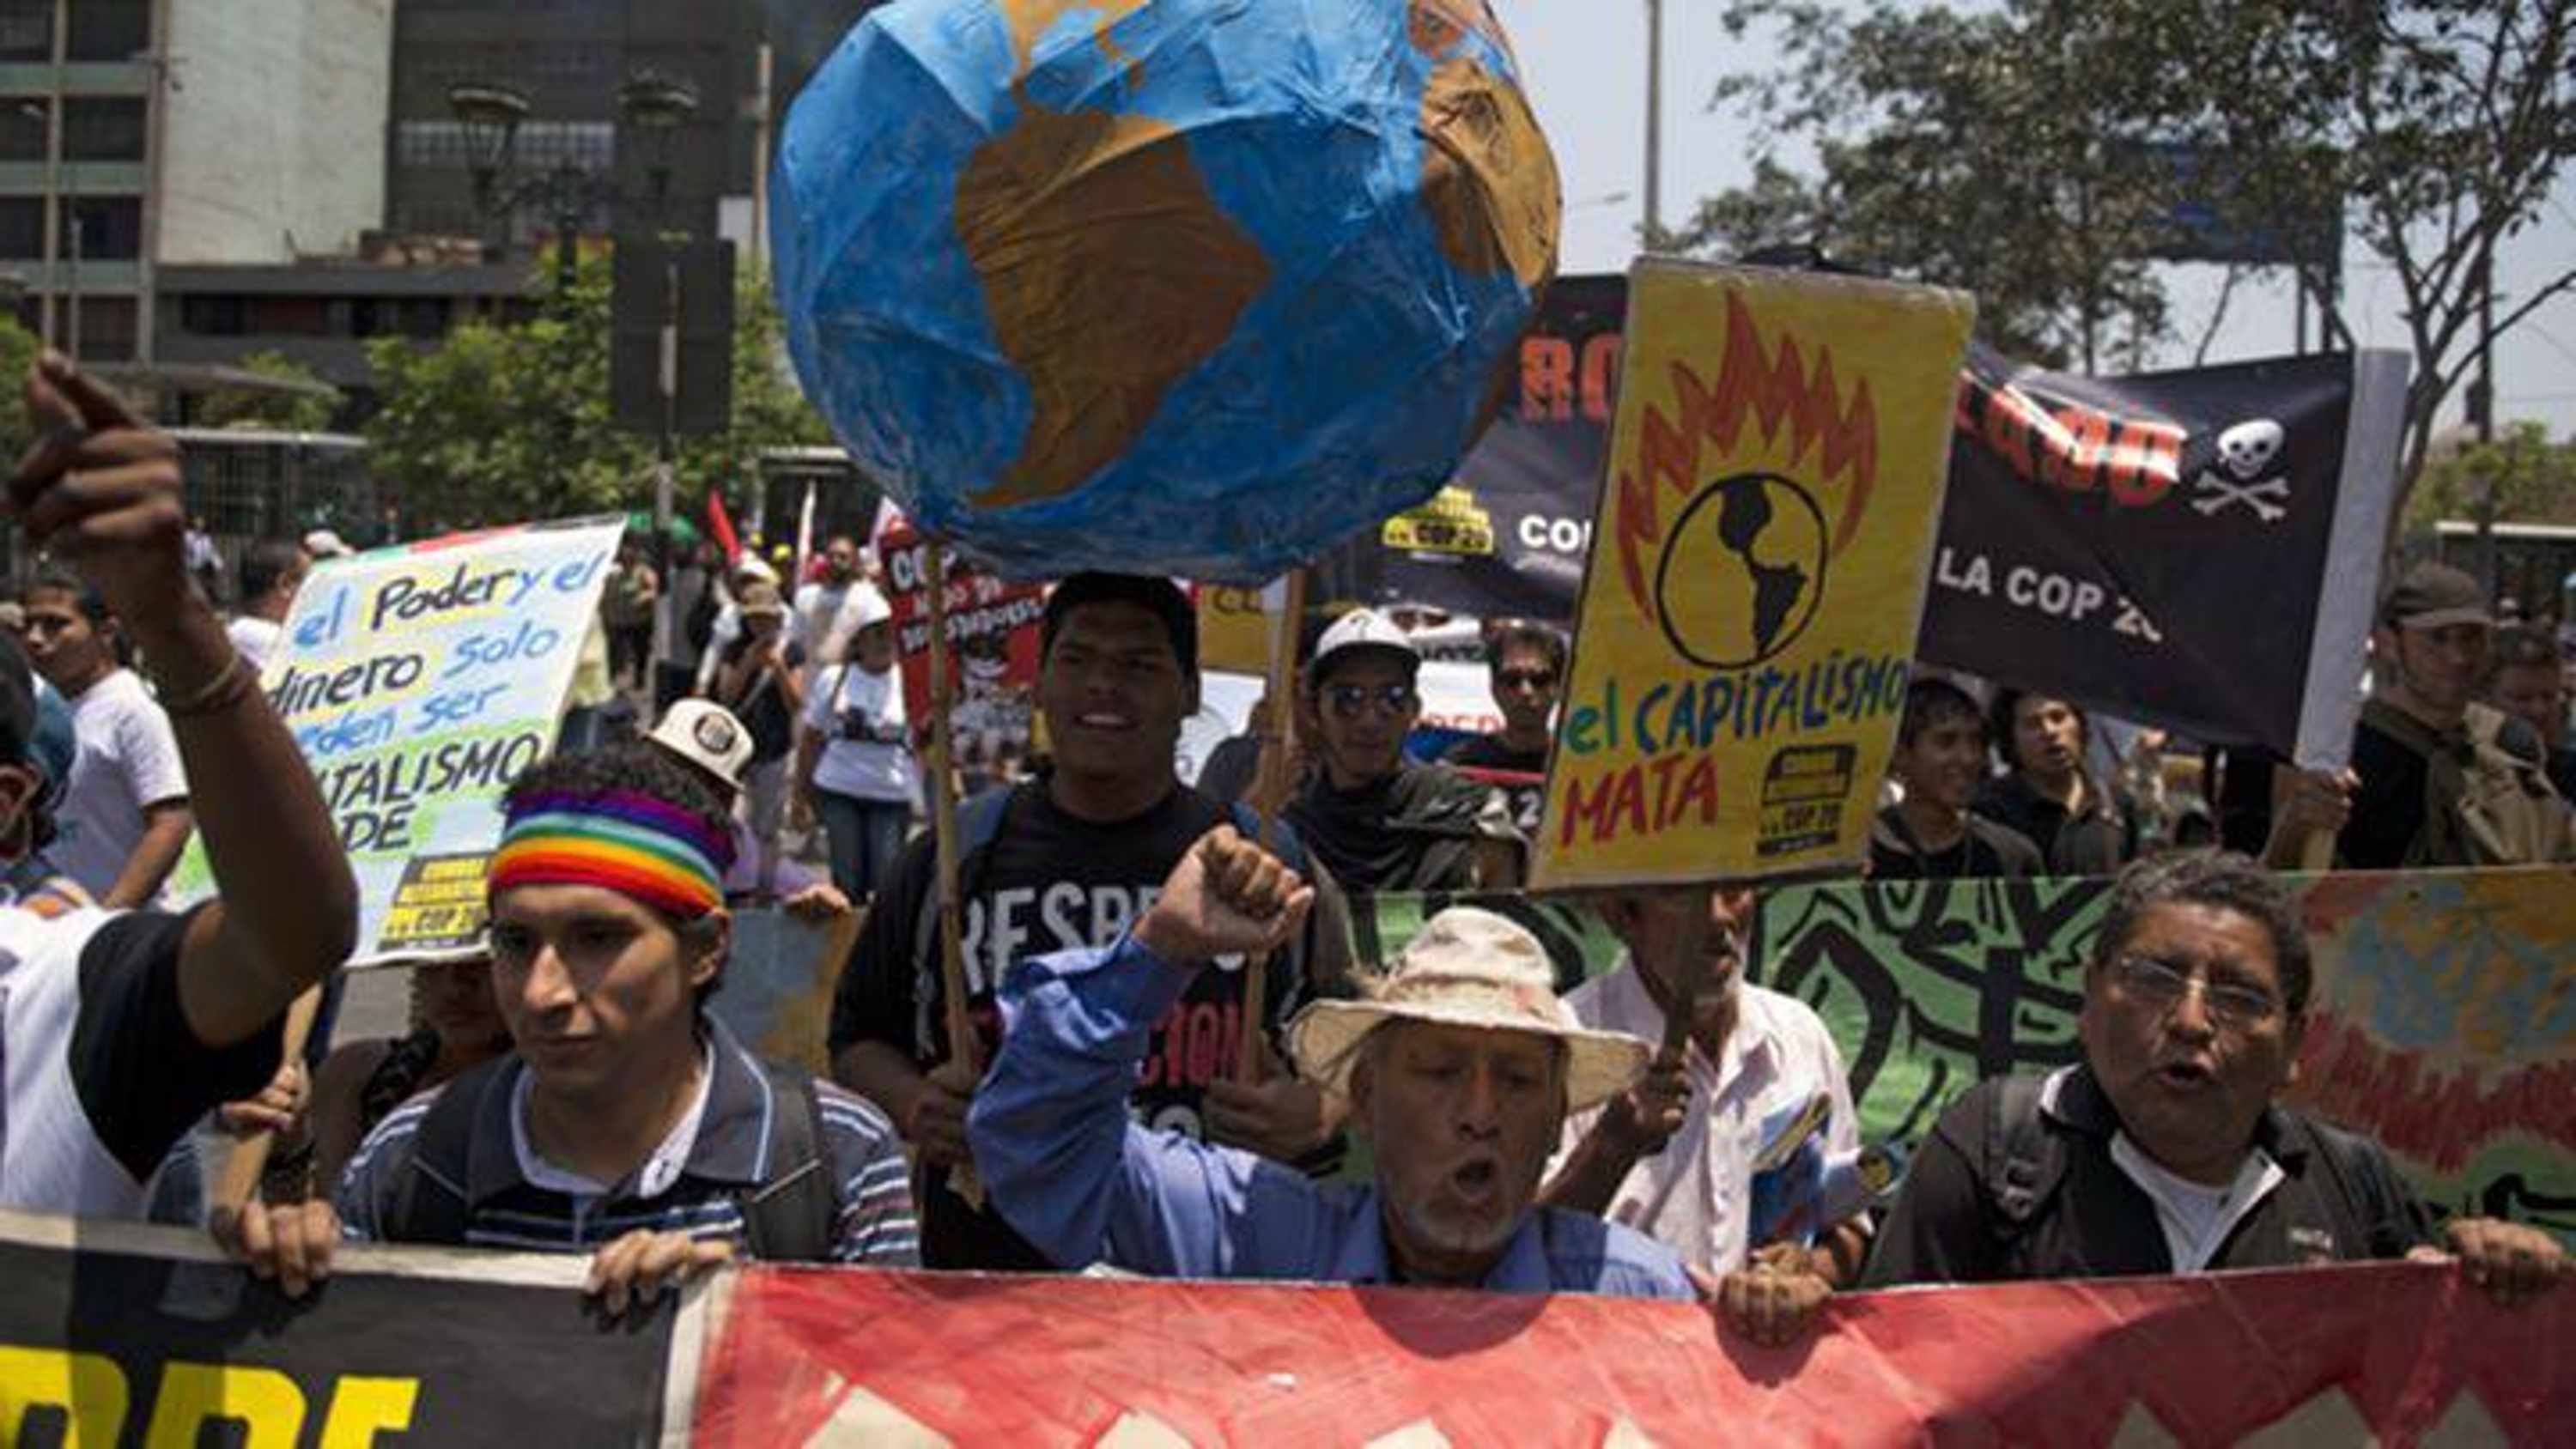 A recent Lima climate protest